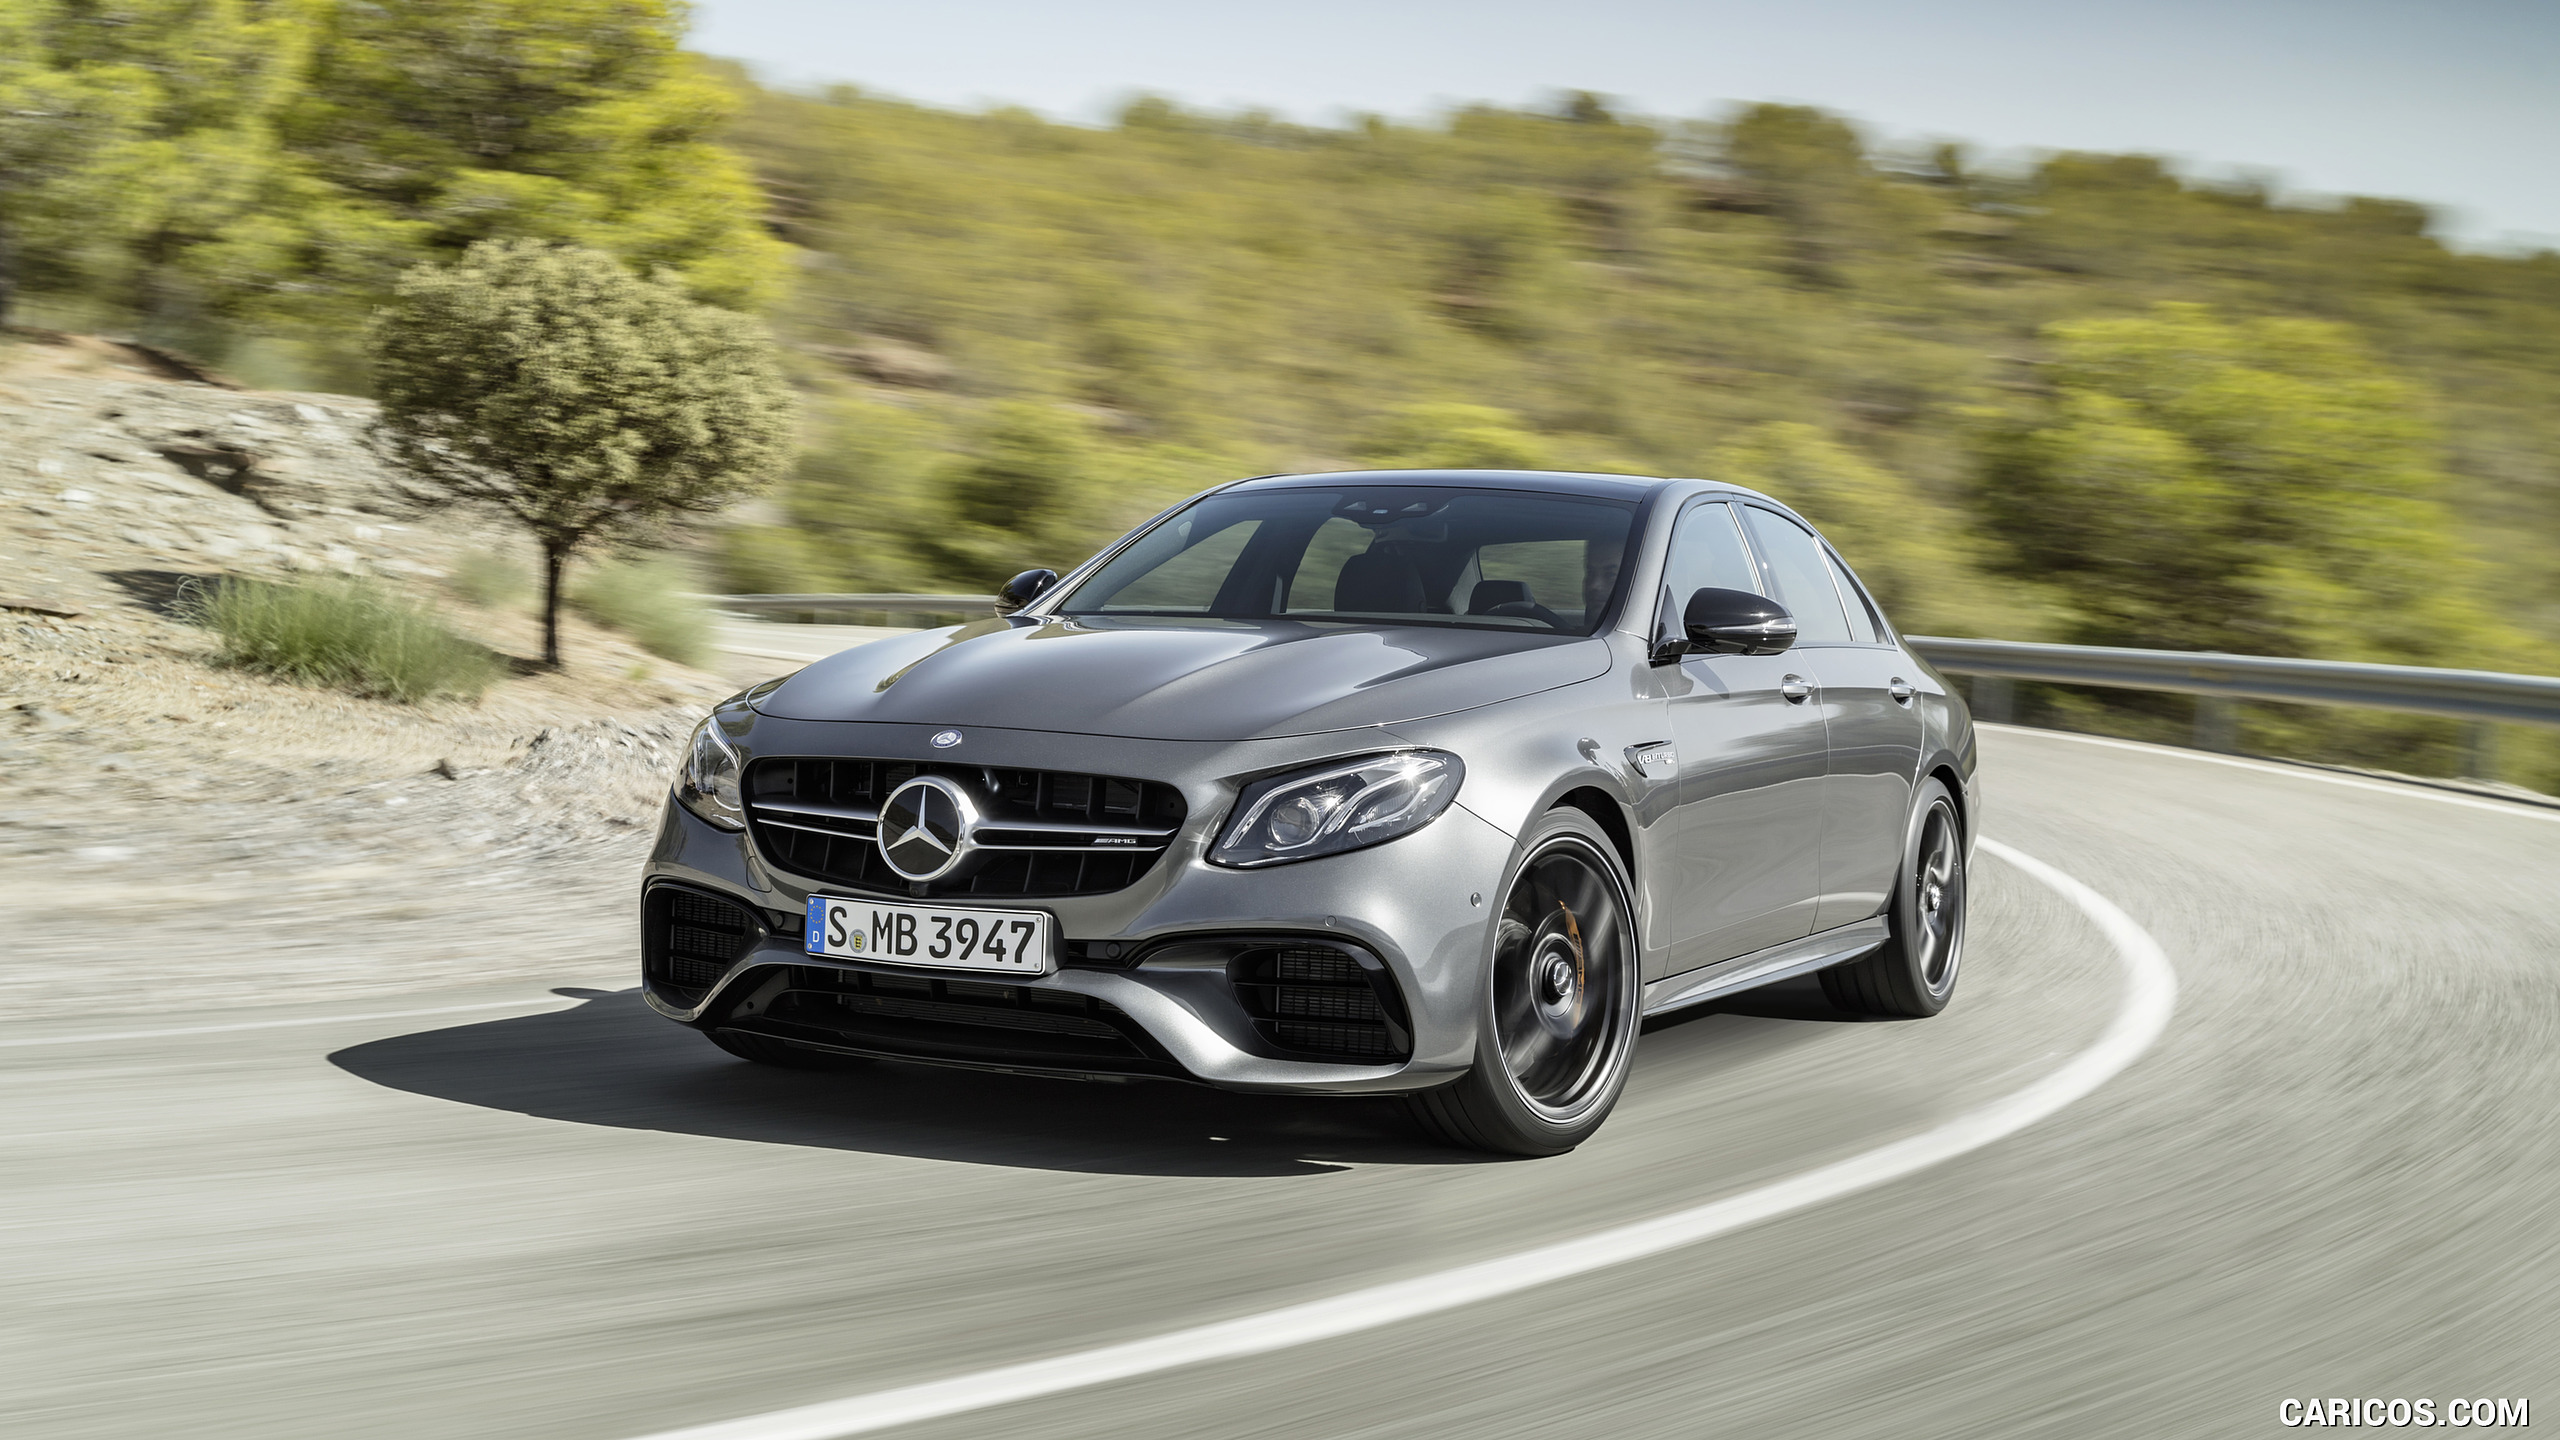 2018 Mercedes-AMG E63 S 4MATIC+ - Front, #3 of 323